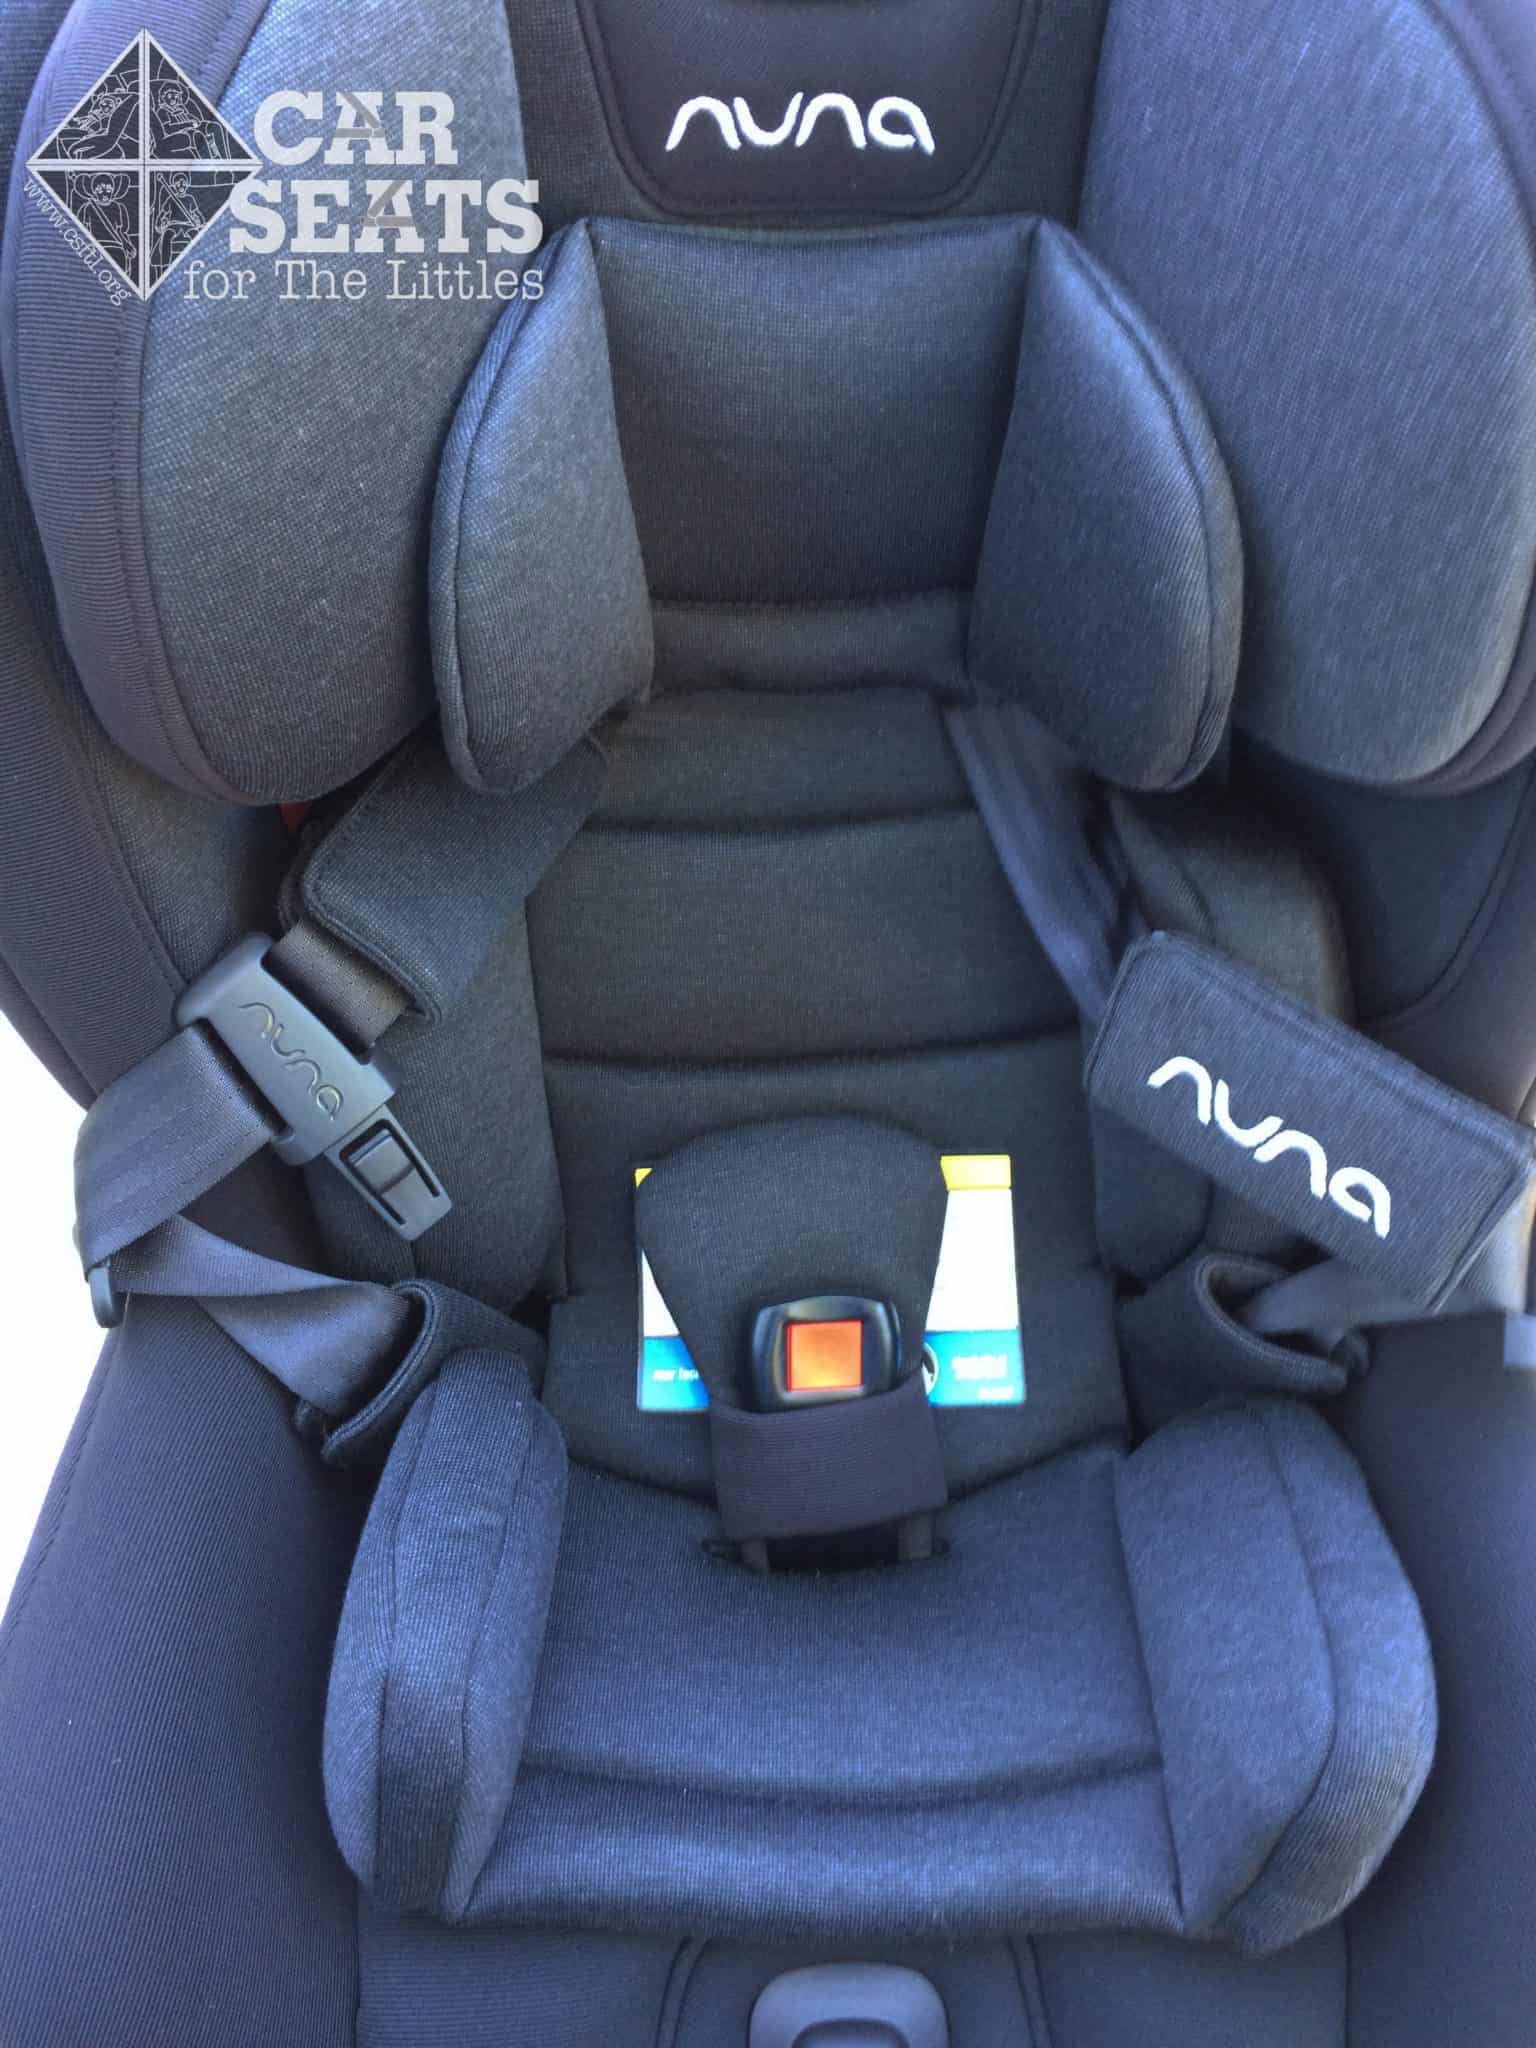 Nuna RAVA Review Car Seats For The Littles